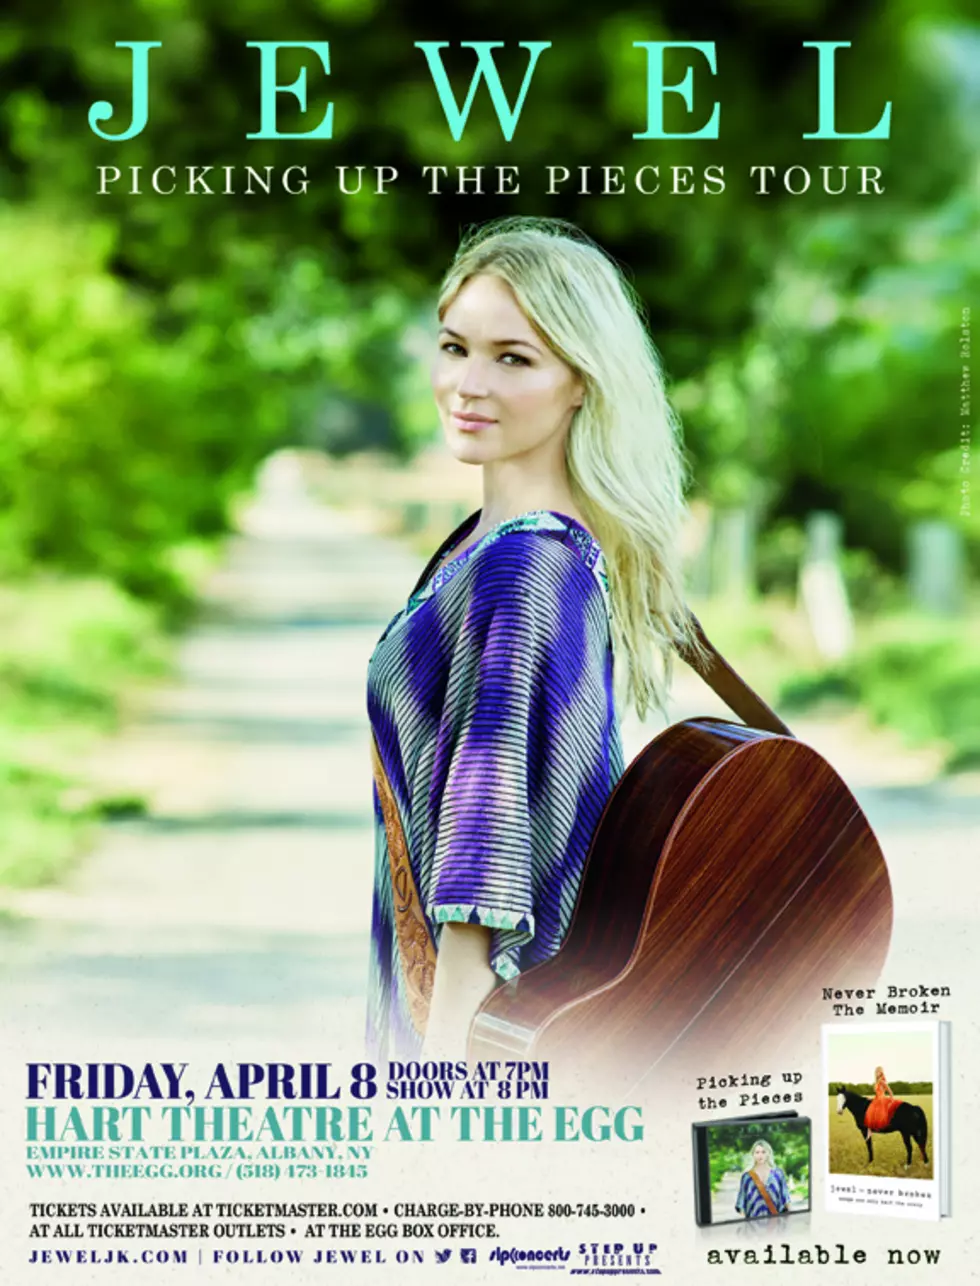 Win Tickets to See Jewel at the Egg